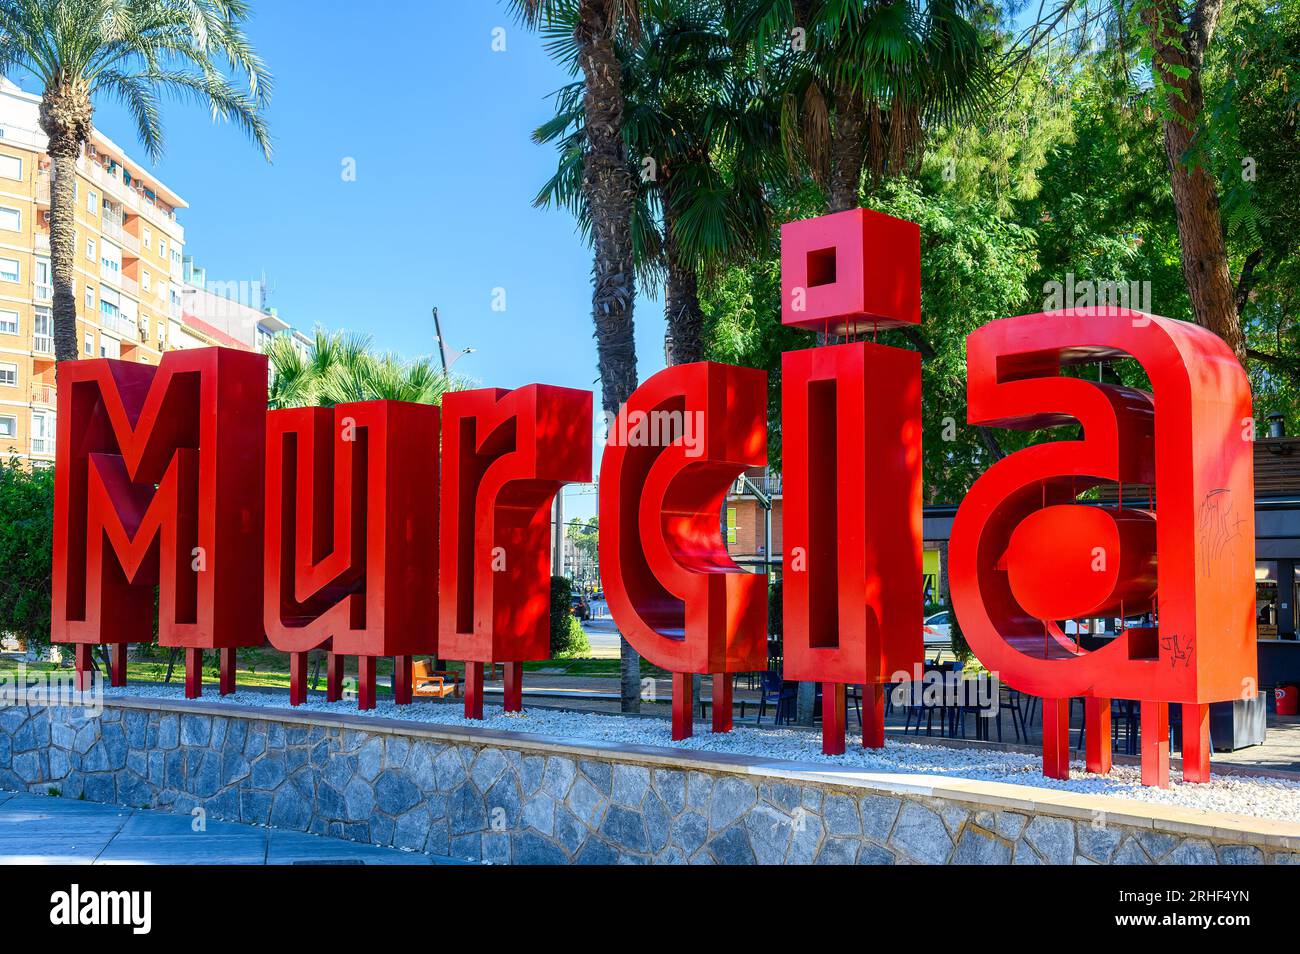 Murcia, Spain, three dimensional sign of the city. The red single word text is located in a public square in the downtown district. Stock Photo